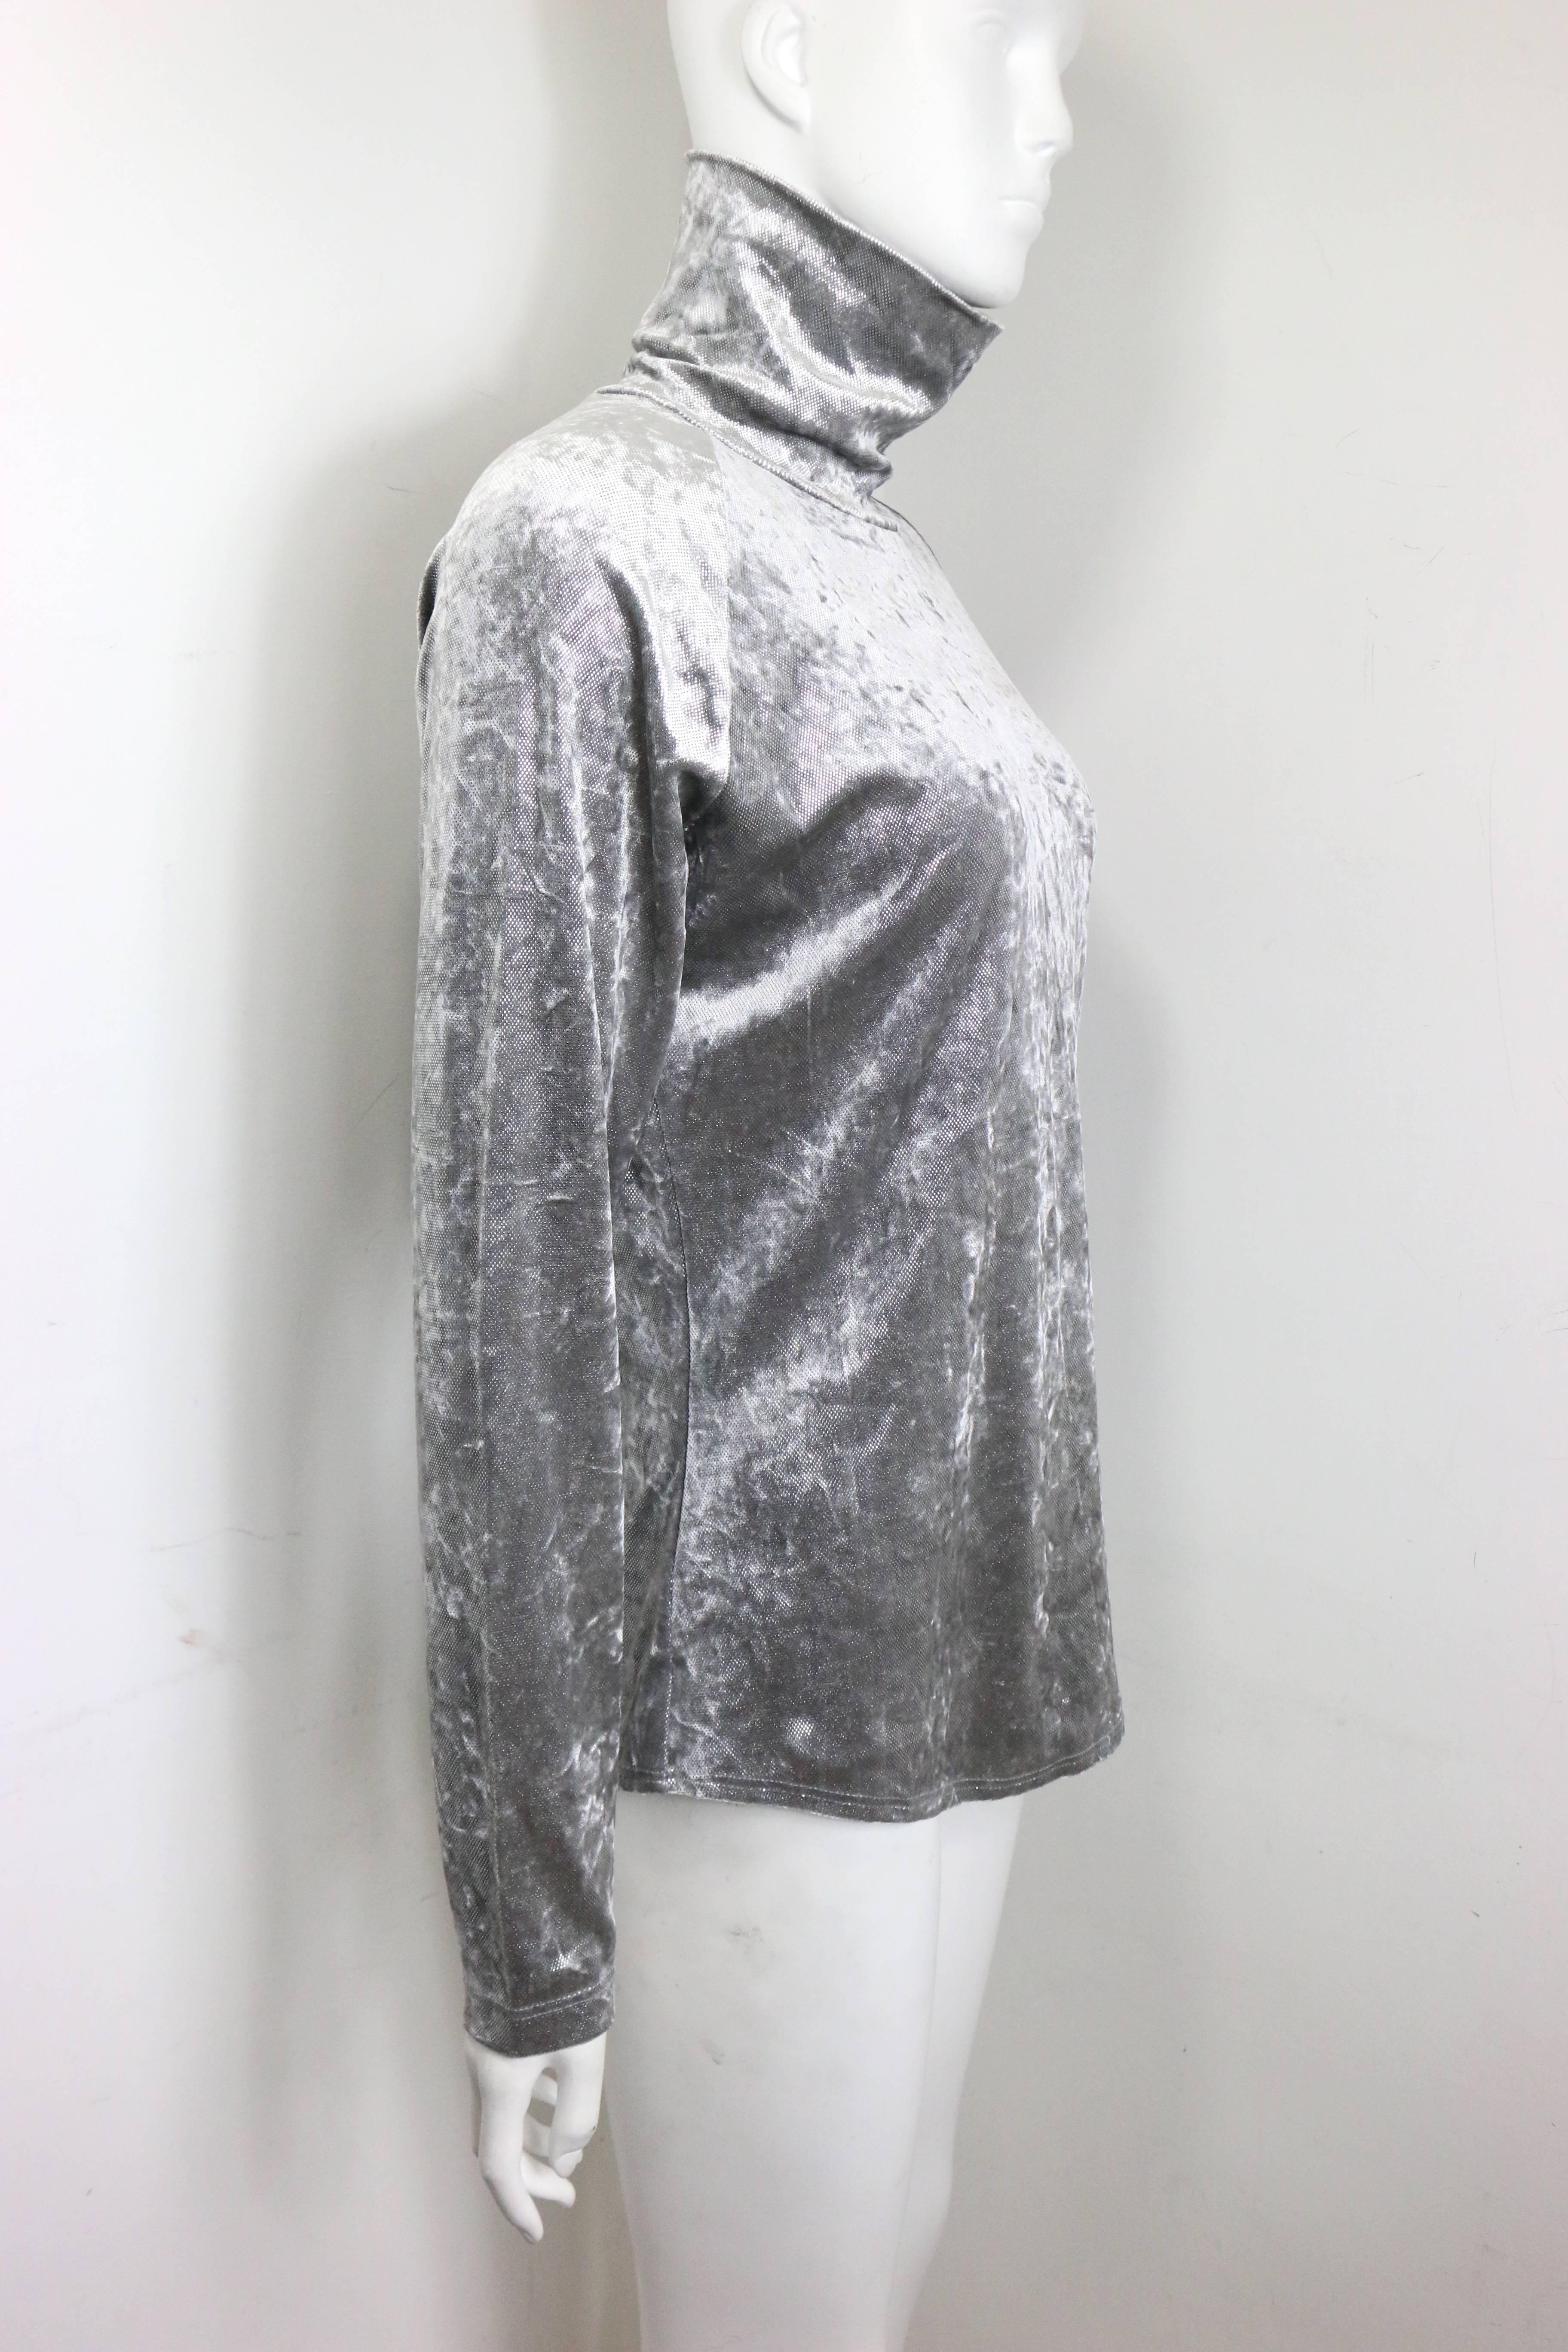 - Vintage 90s Paco Rabanne silver shiny and glitter pullover turtleneck top. 

- Made in France. 

- Size L. 

- 77% Acetate, 14% Nylon, 9% Elastane. 

